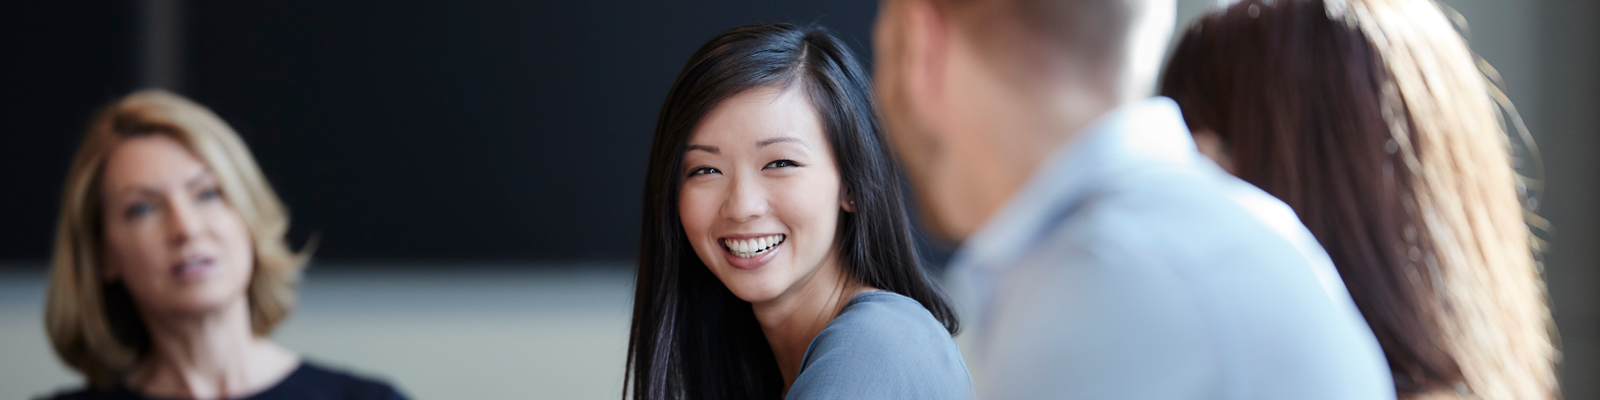 Young female professional smiling during group discussion